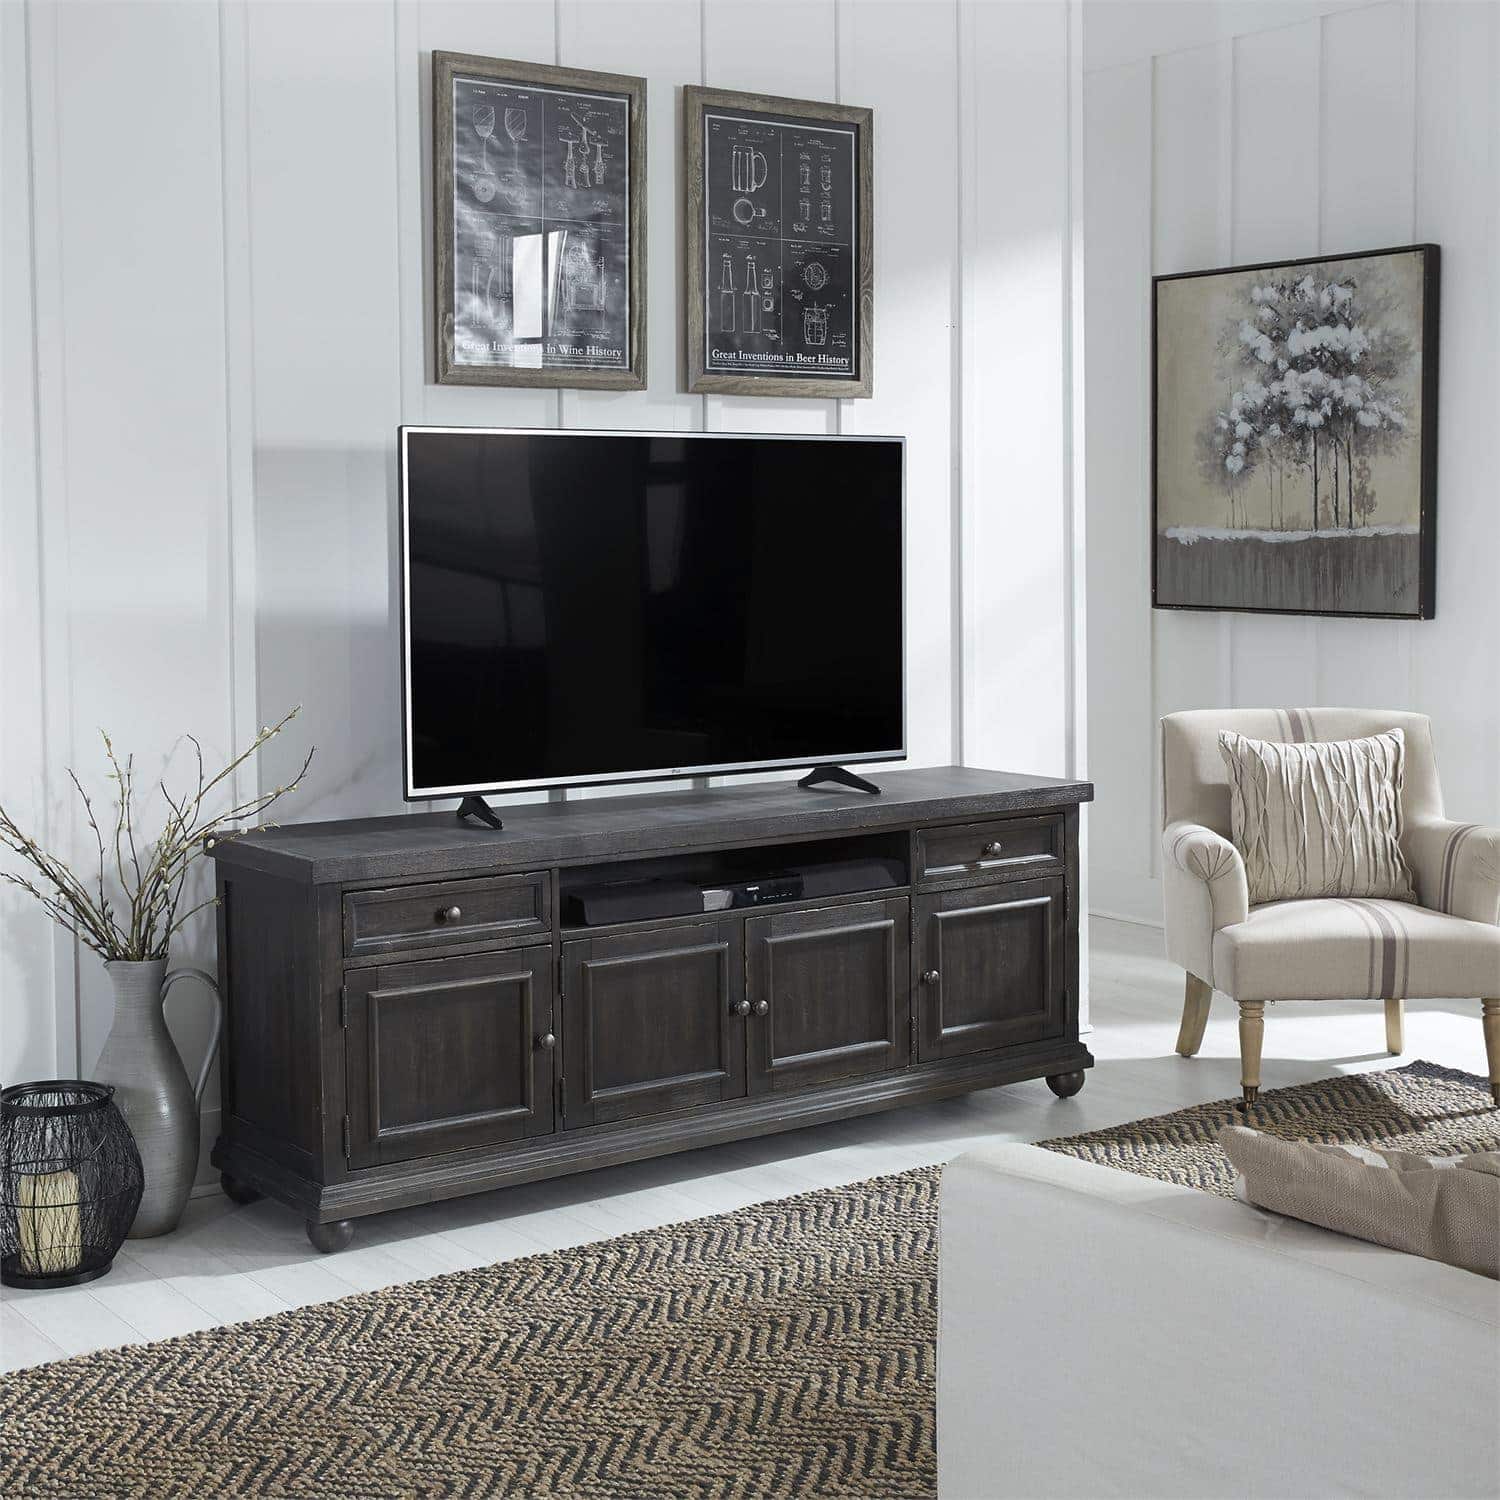 liberty furniture harvest home collection 66 inch tv console